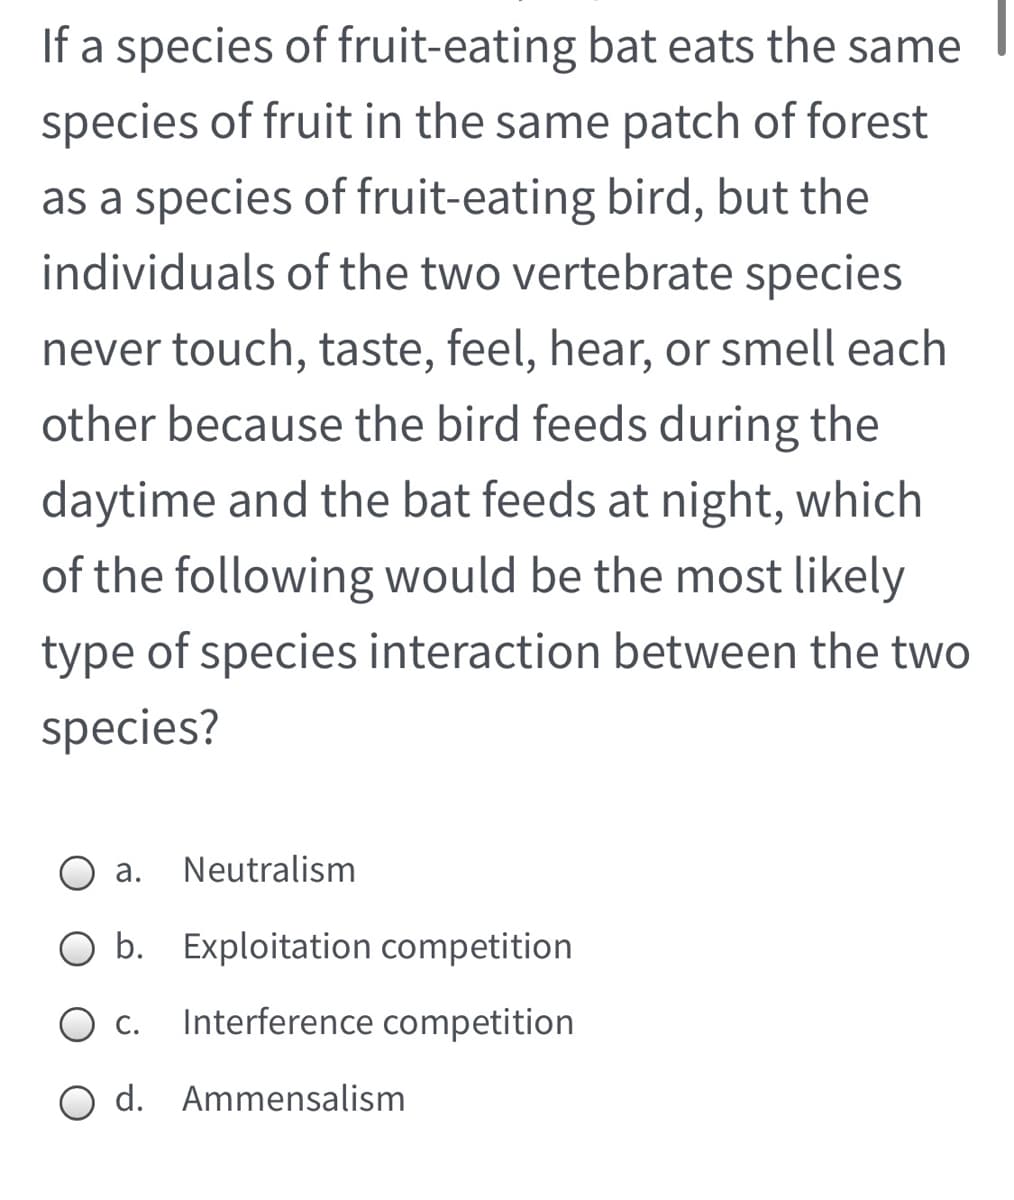 If a species of fruit-eating bat eats the same
species of fruit in the same patch of forest
as a species of fruit-eating bird, but the
individuals of the two vertebrate species
never touch, taste, feel, hear, or smell each
other because the bird feeds during the
daytime and the bat feeds at night, which
of the following would be the most likely
type of species interaction between the two
species?
O a.
Neutralism
O b. Exploitation competition
O c. Interference competition
С.
O d. Ammensalism
